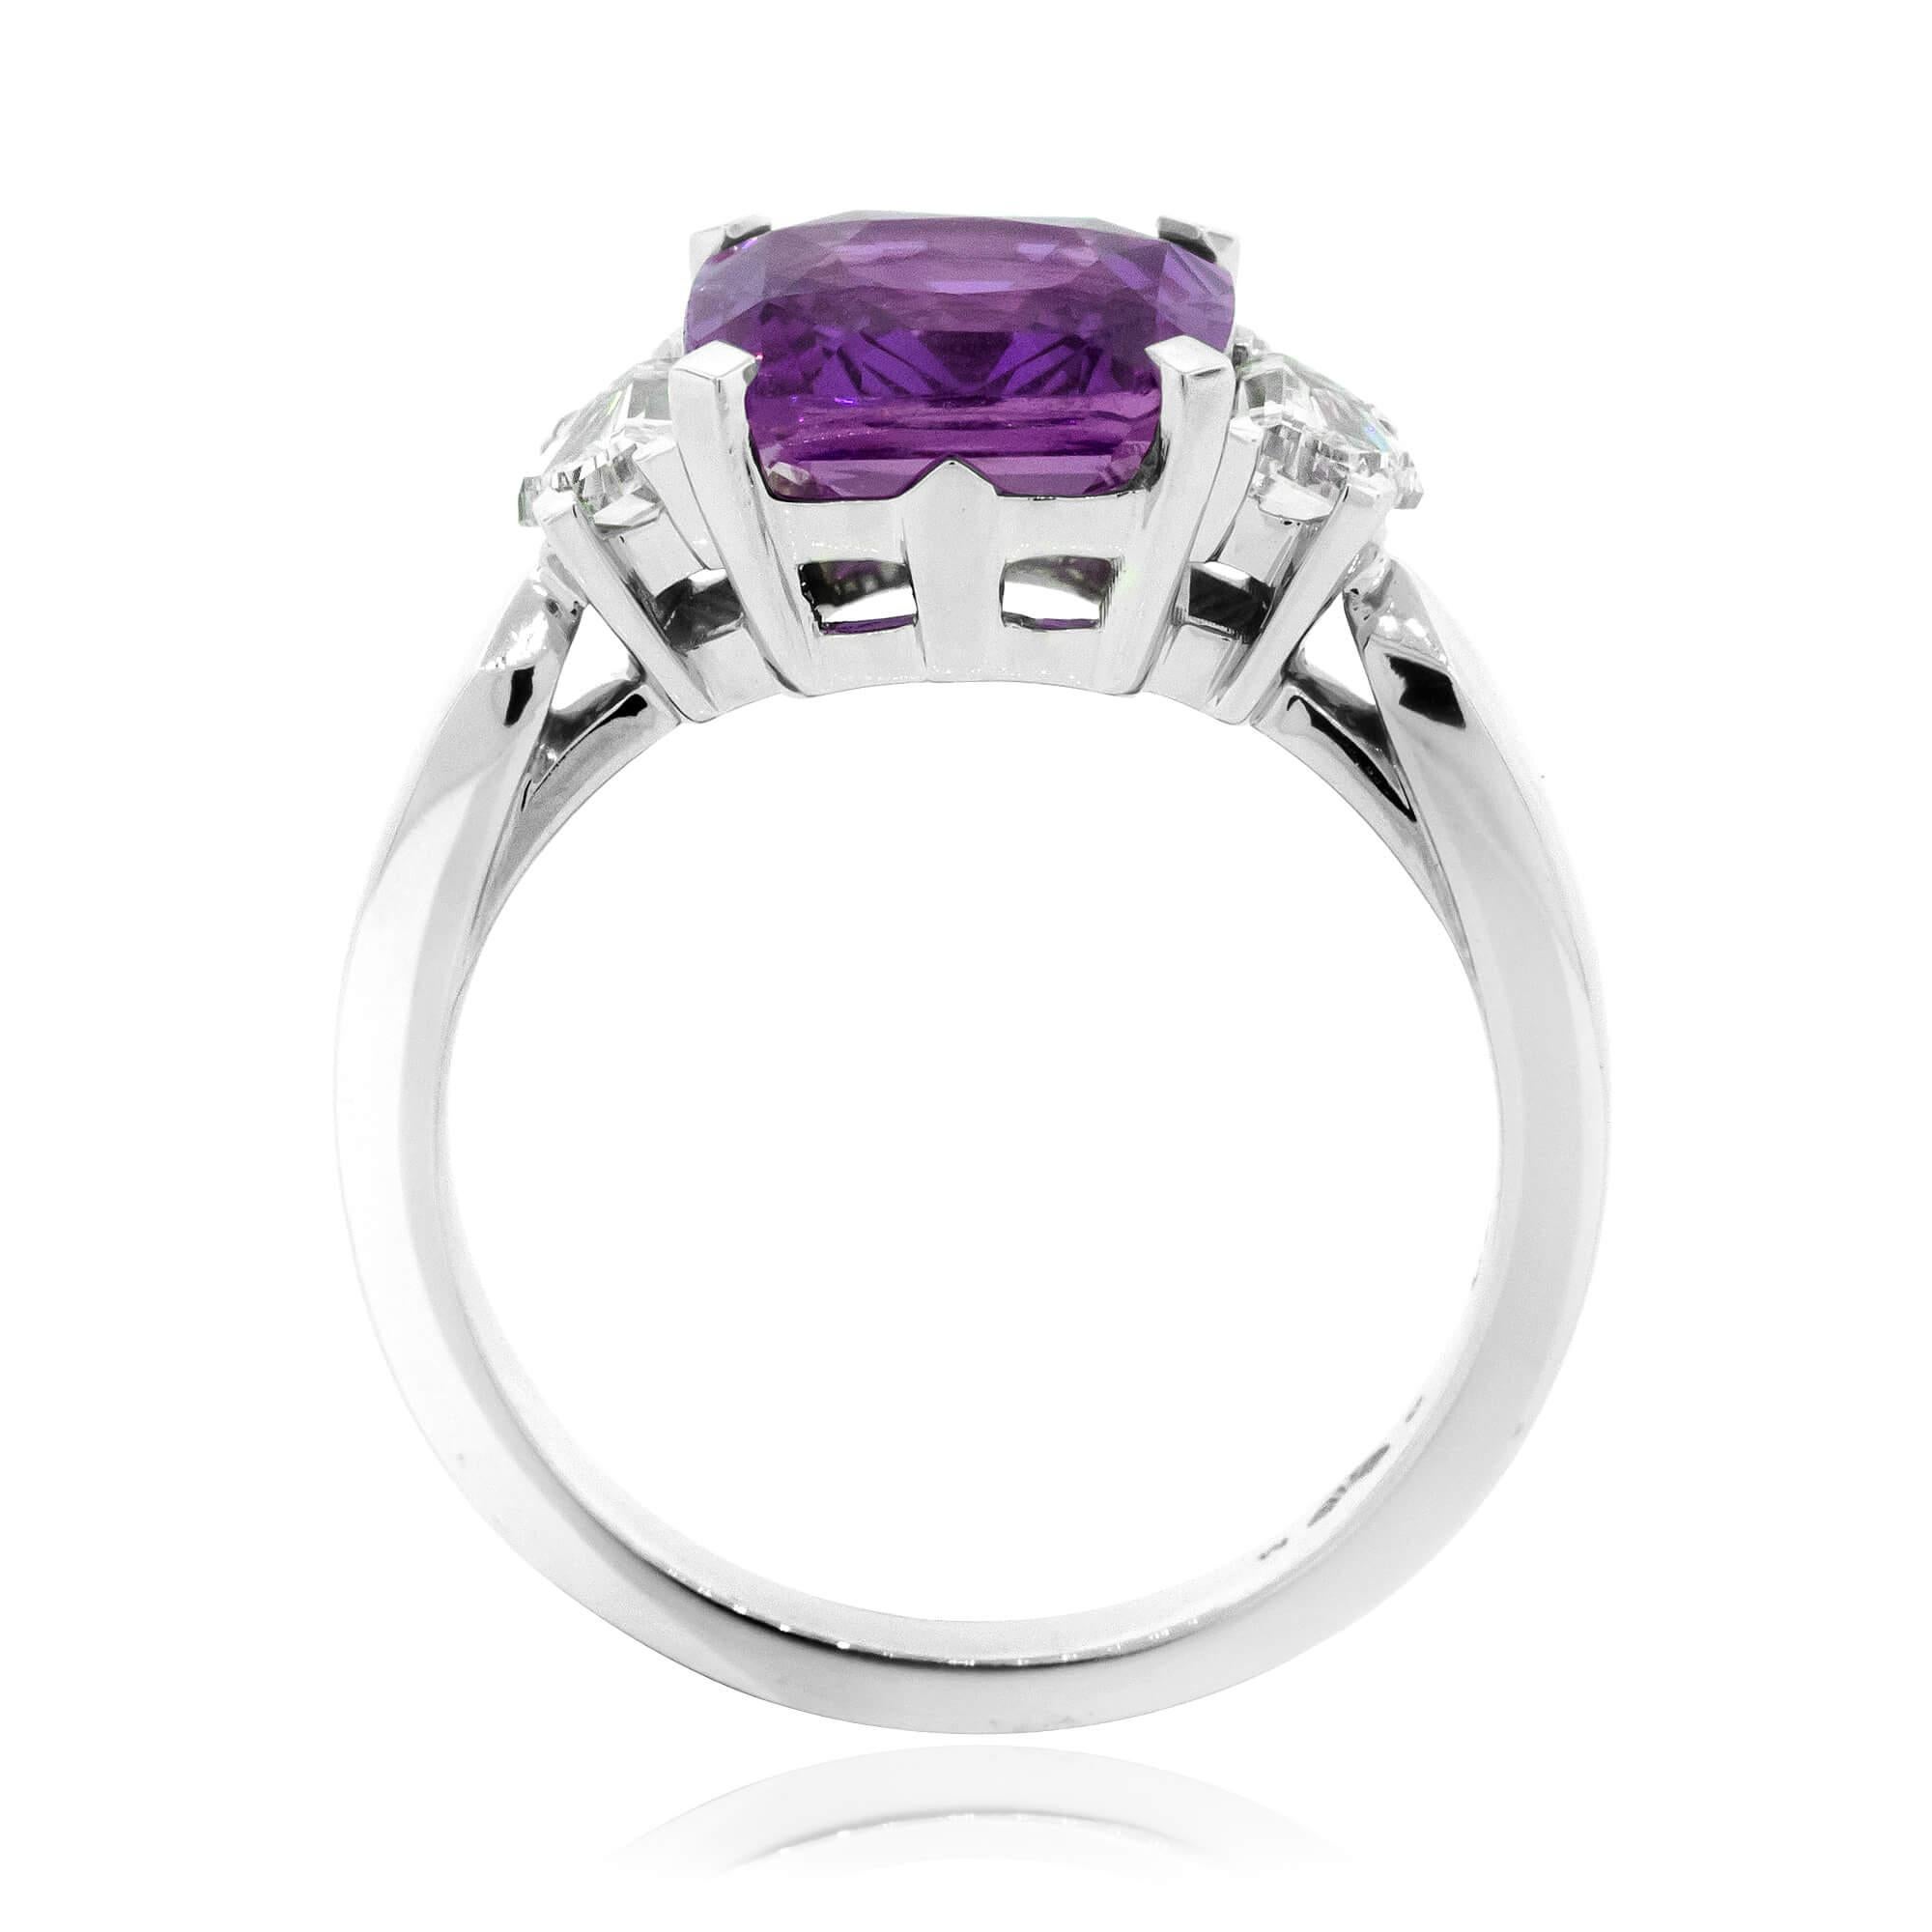 Aeon is a bold ring design that showcases exceptional colour and beauty. Each natural gemstone in this range has been hand-selected for its impressive hue and is accented with complementary-shaped diamonds. Passion is woven into the very foundation